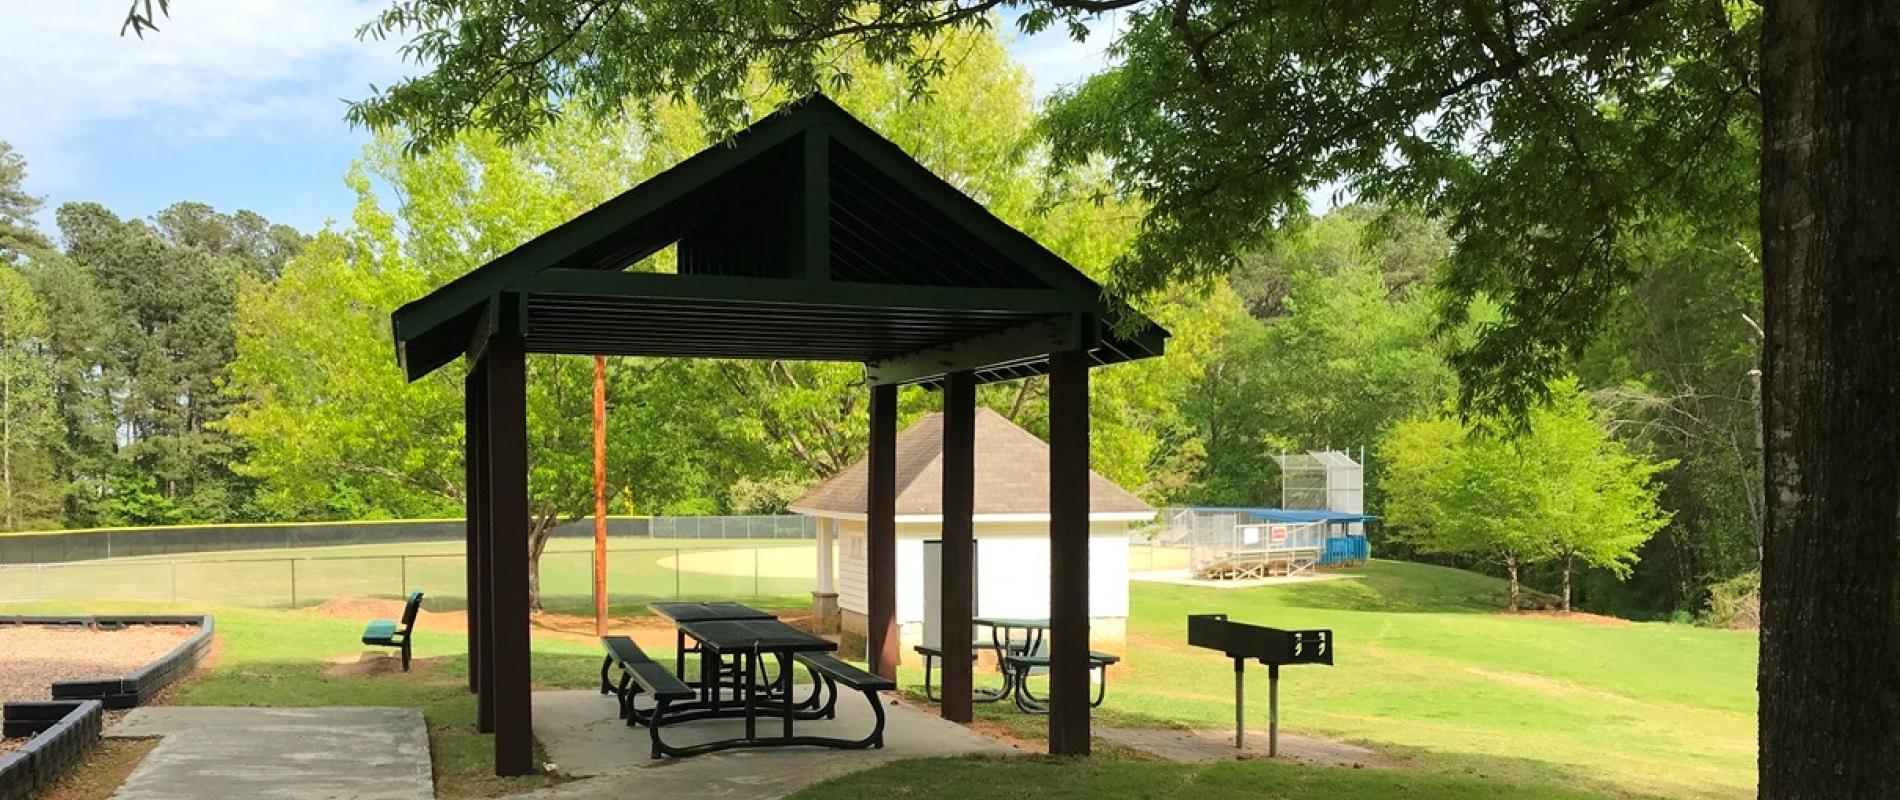 Ailey Young Picnic Shelter